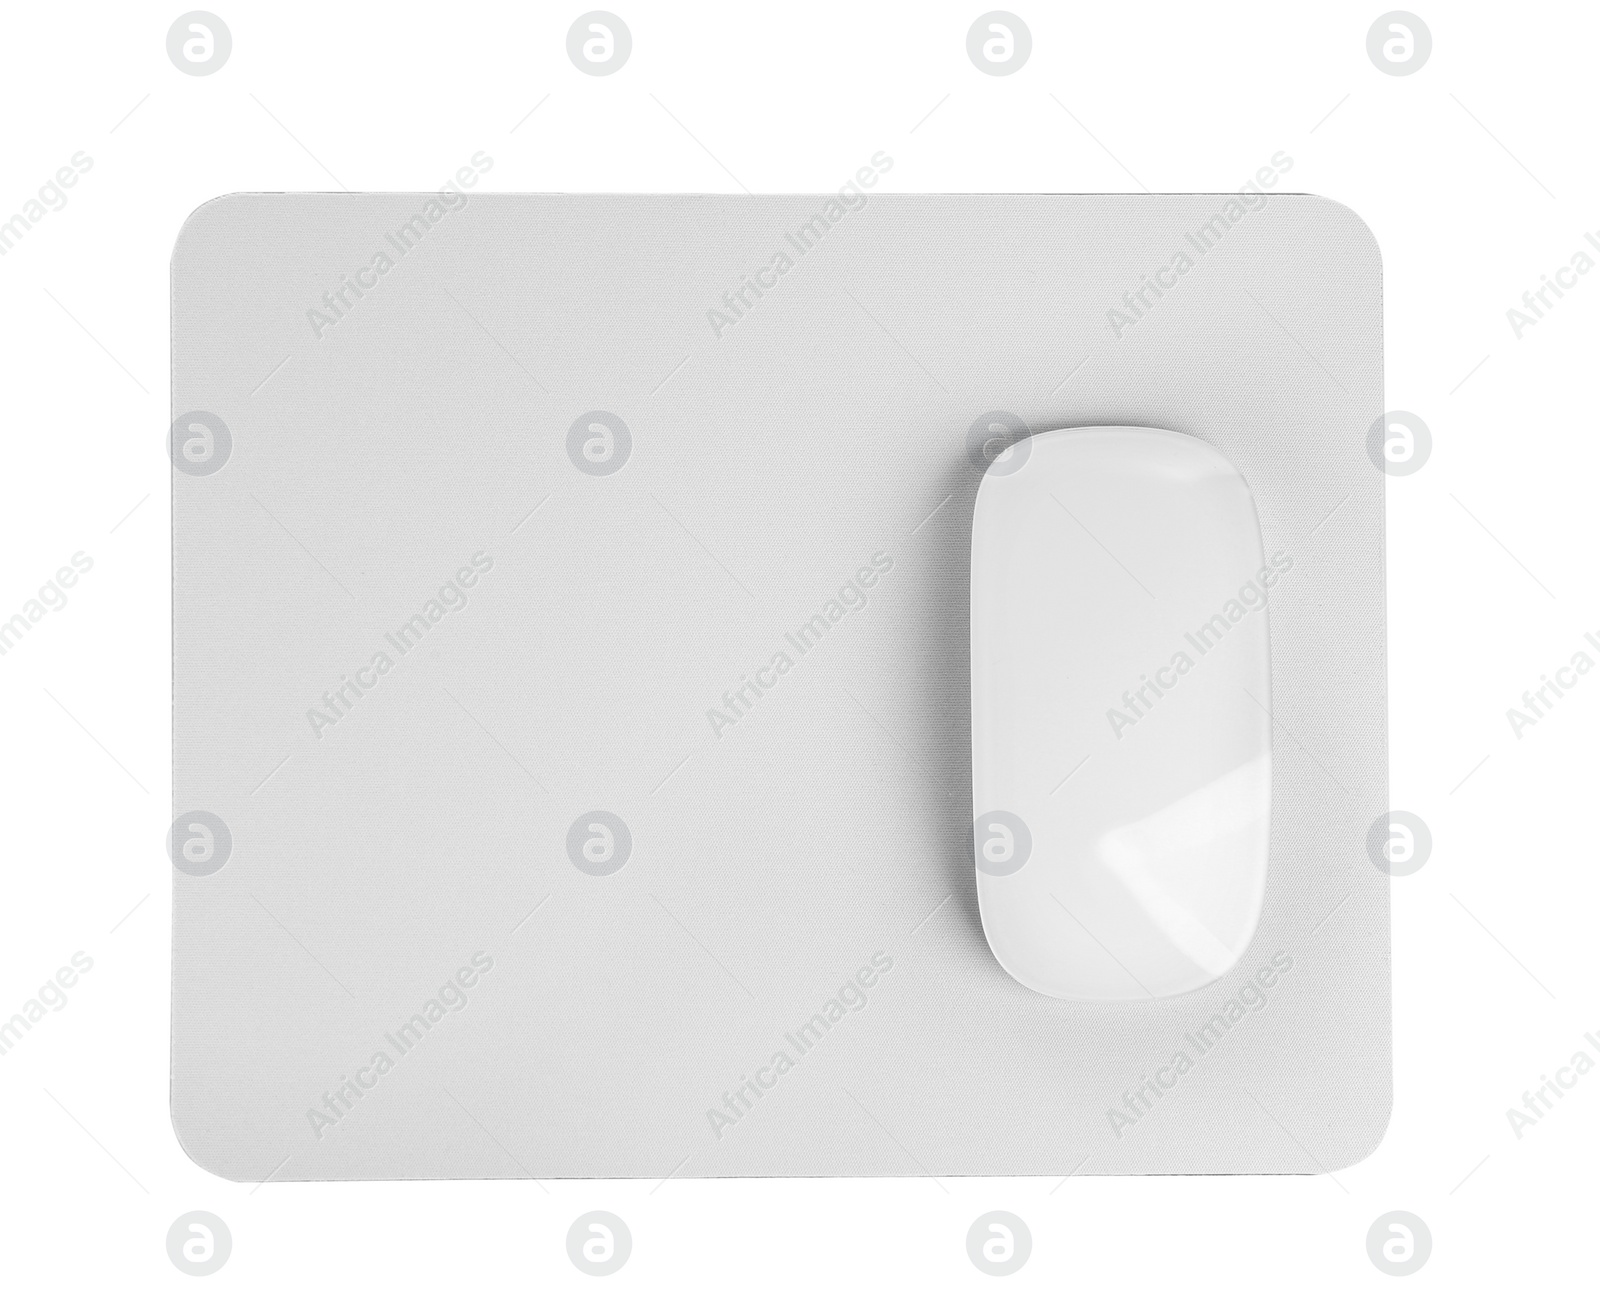 Photo of Wireless optical mouse and pad isolated on white, top view